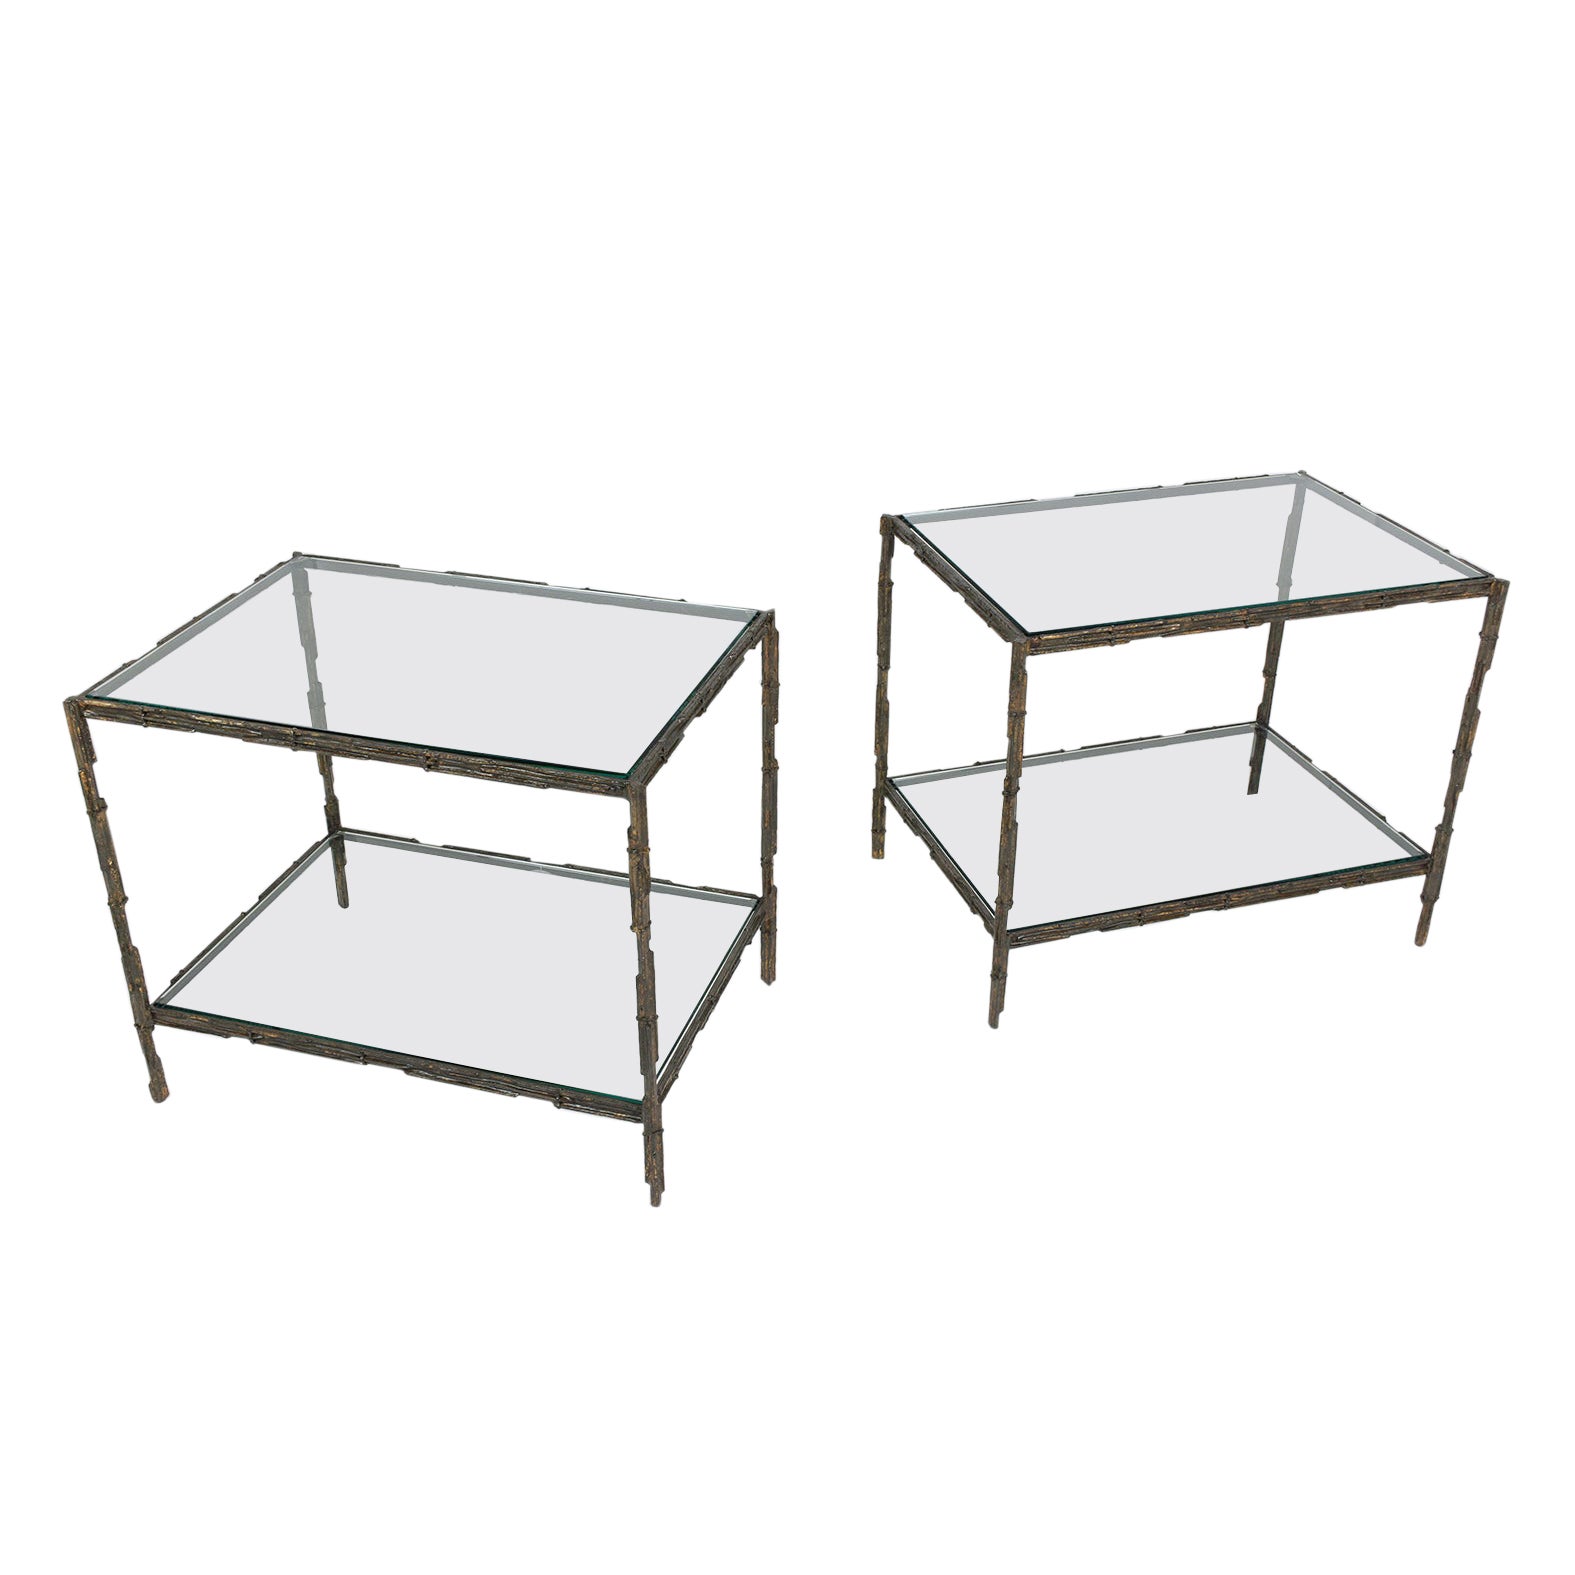 Pair of Mid-Century Modern Side Tables